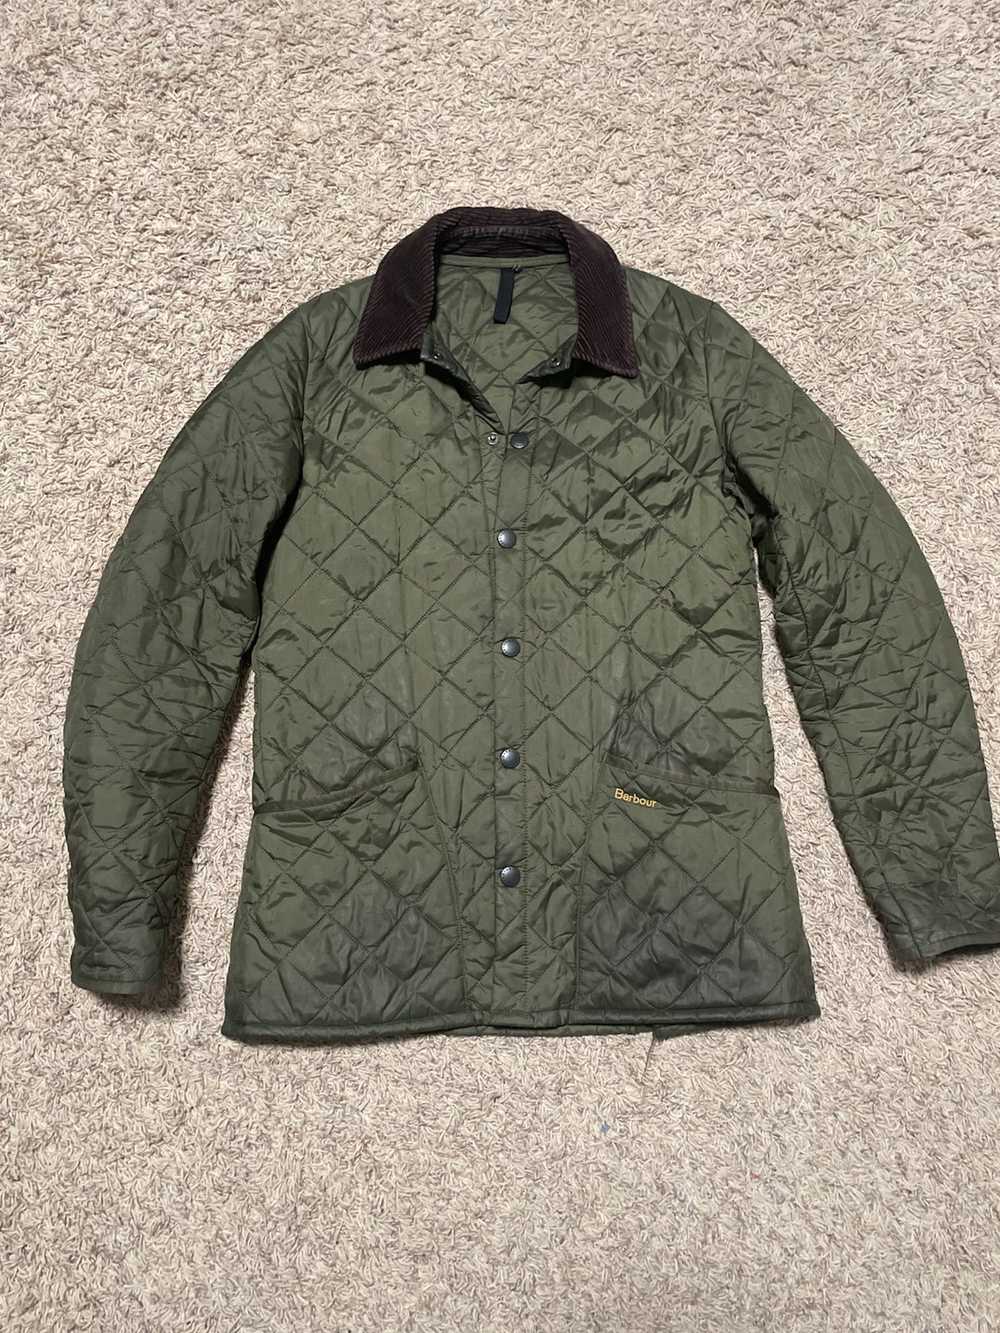 Barbour Womens Barn jacket - image 1